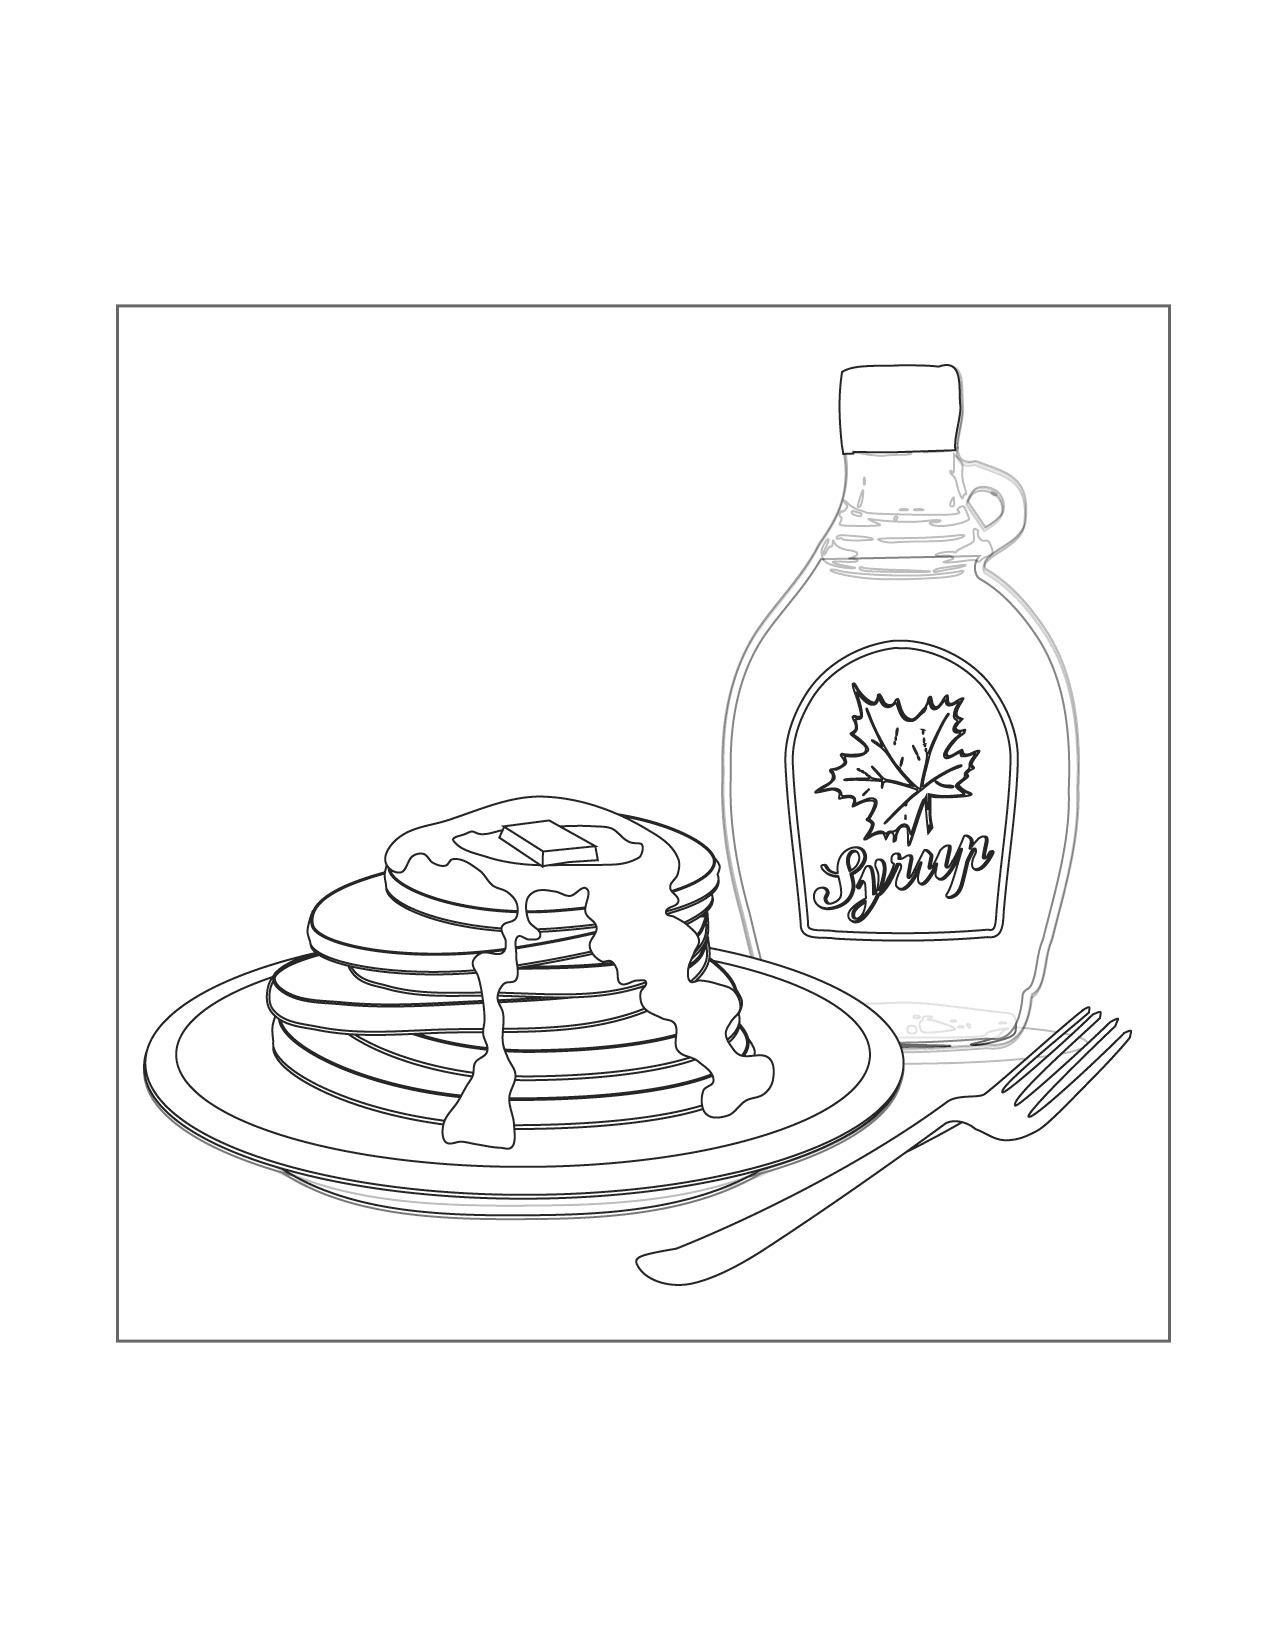 Pancakes And Maple Syrup Coloring Page